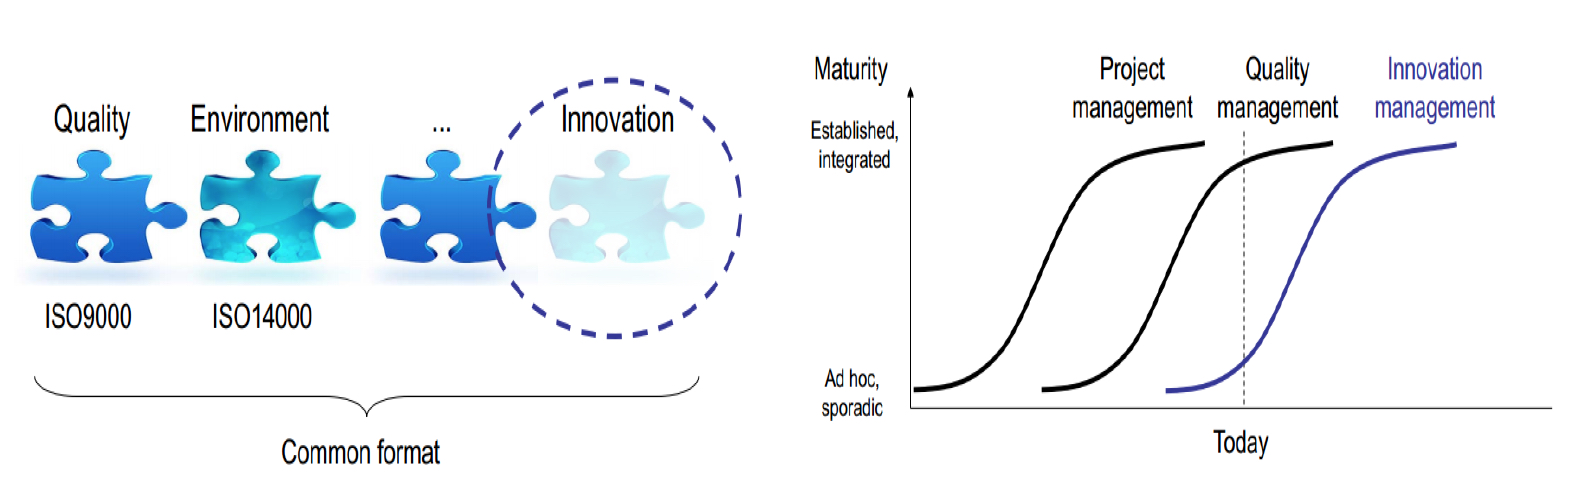 Innovation Leads To Dematurity Of Mature Industries